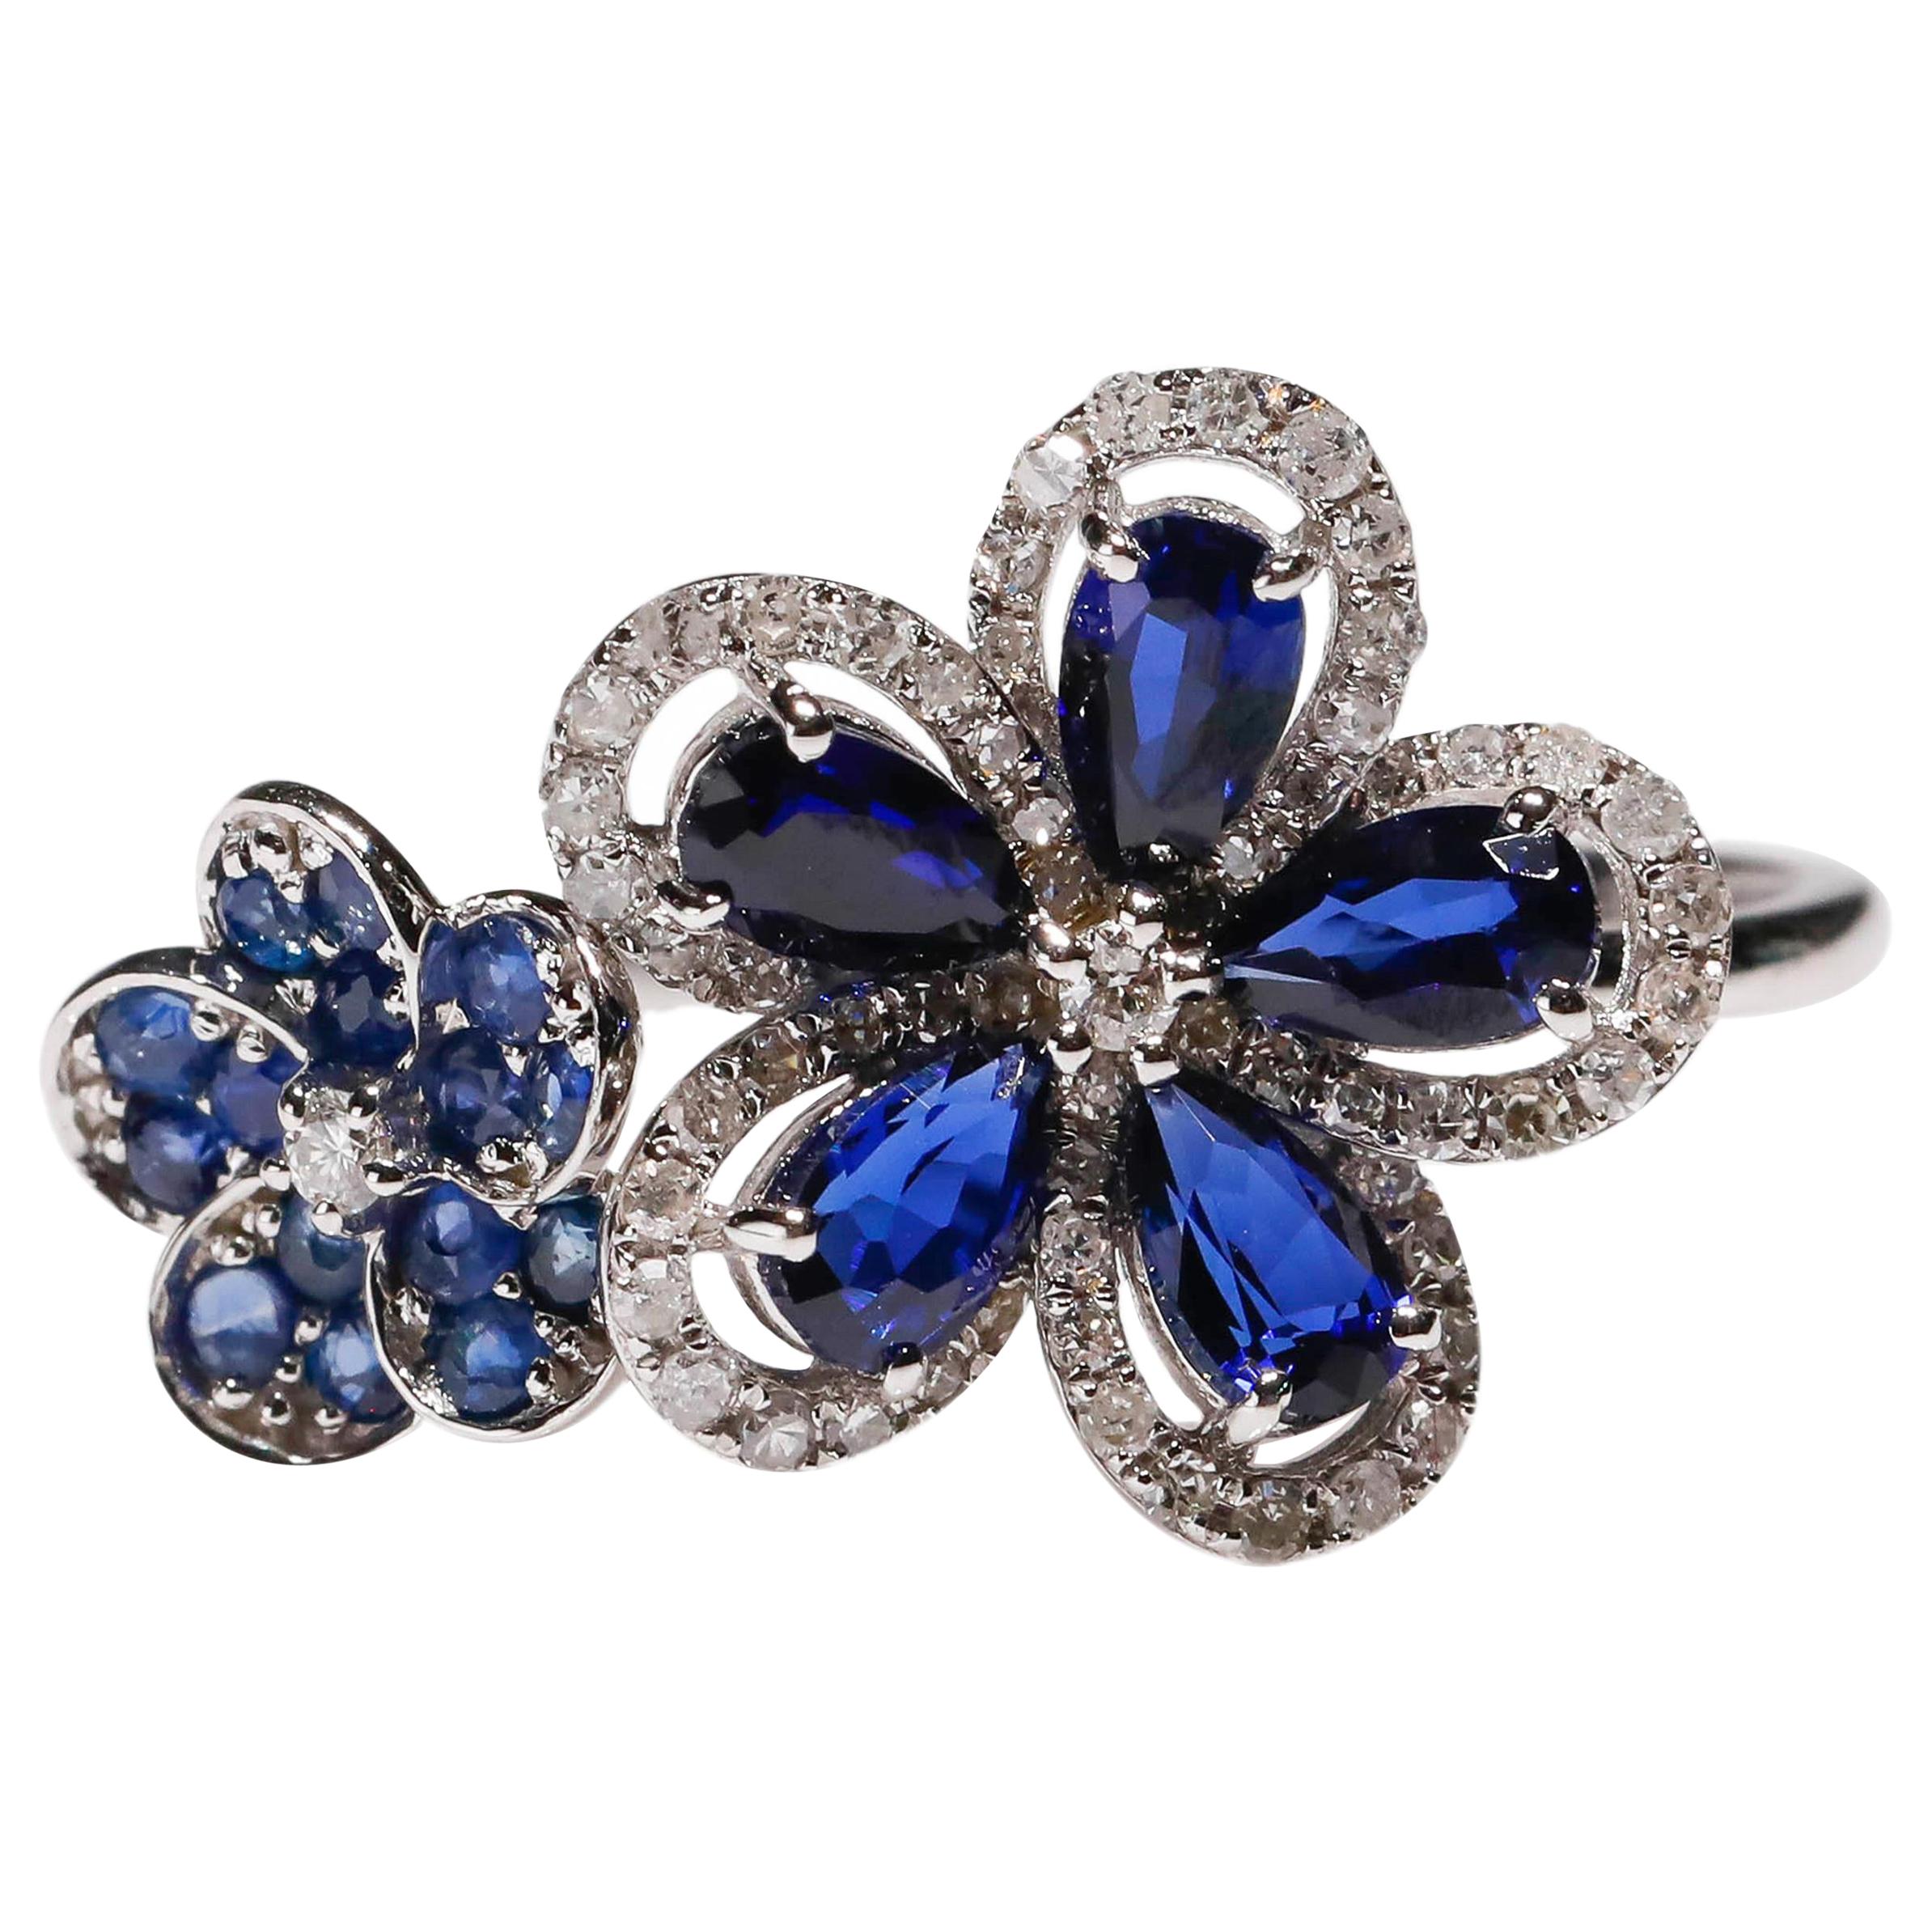 14 Karat White Gold Blue Sapphire 0.29 Carat Diamond Double Flower Bridal Ring

Crafted in 14kt White Gold, this Unique design showcases a Blue Sapphire Floral designs, set in a halo of round-cut mesmerizing diamonds, Polished to a brilliant